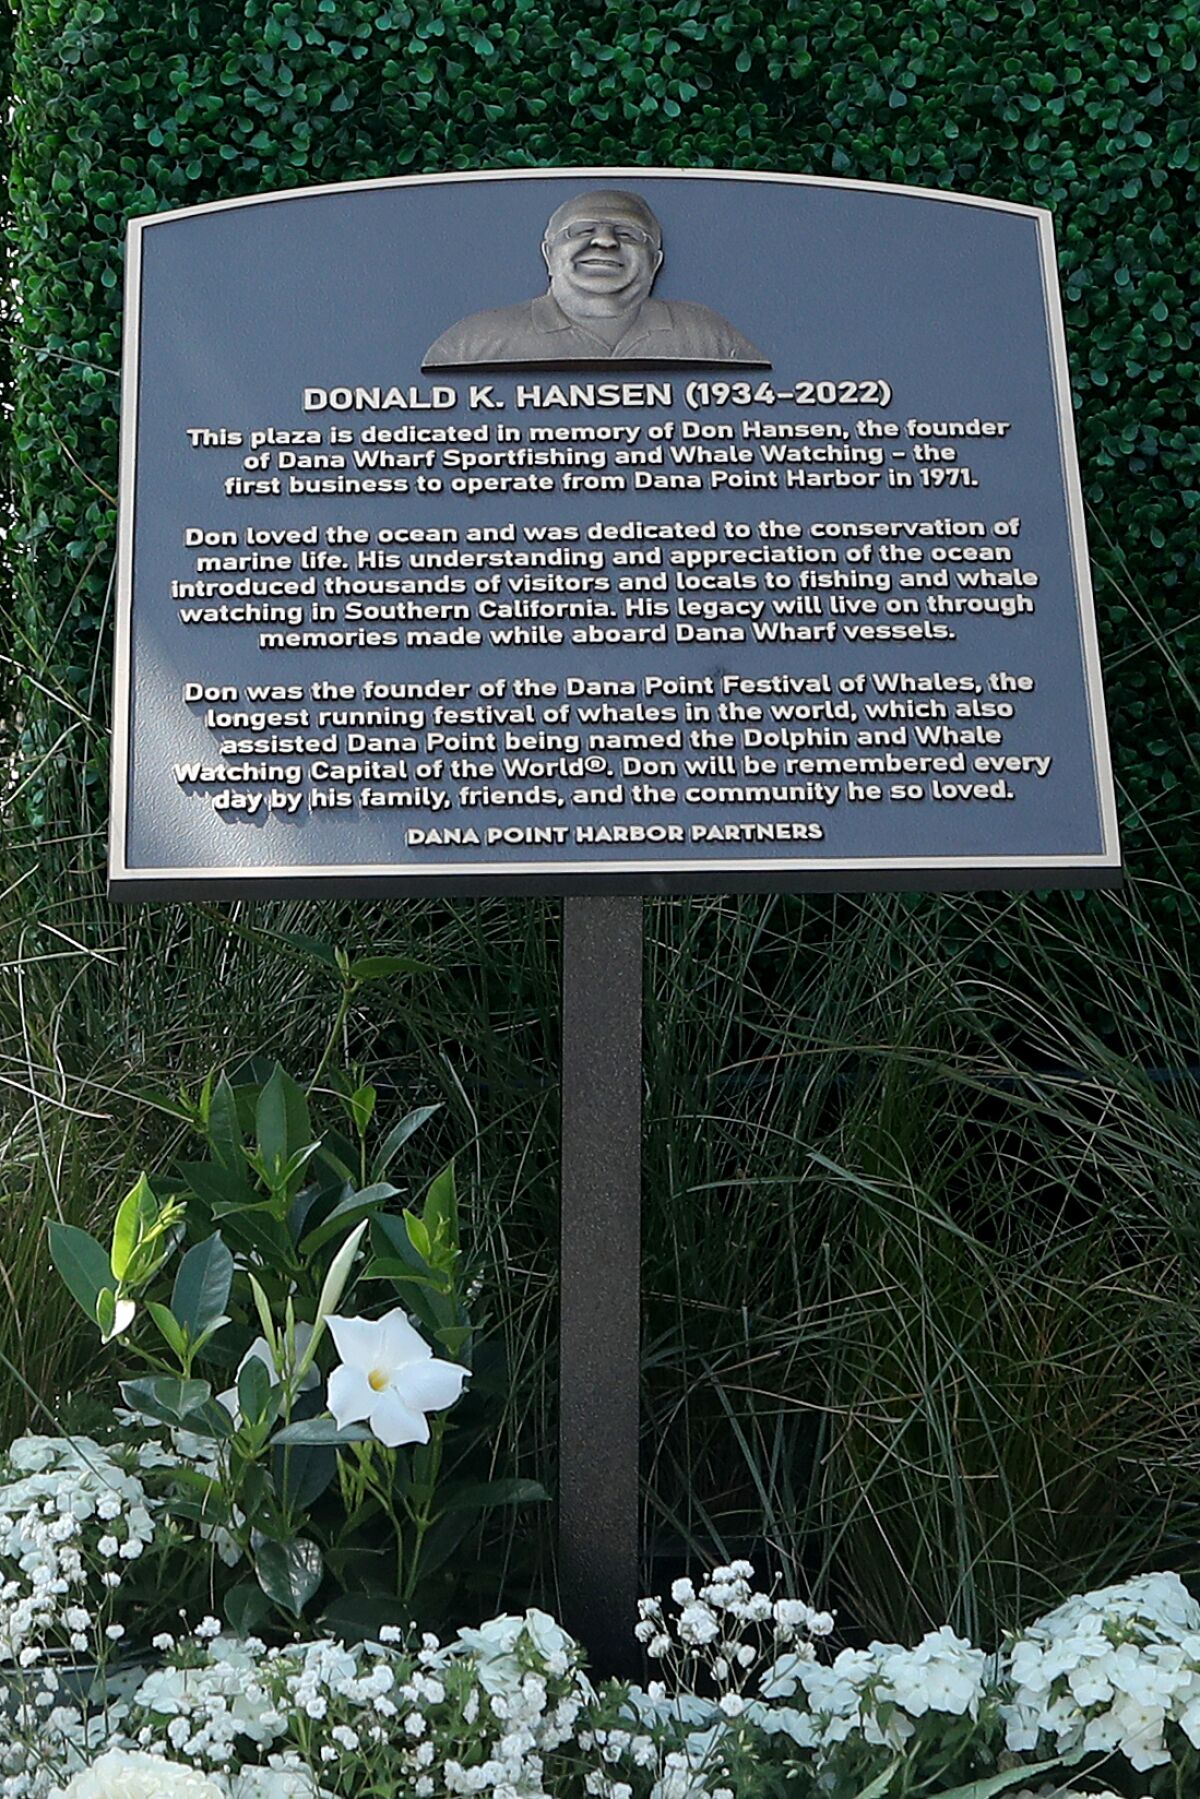 The Hansen Plaza plaque was unveiled at Dana Wharf Sportfishing & Whale Watching on Aug. 3.